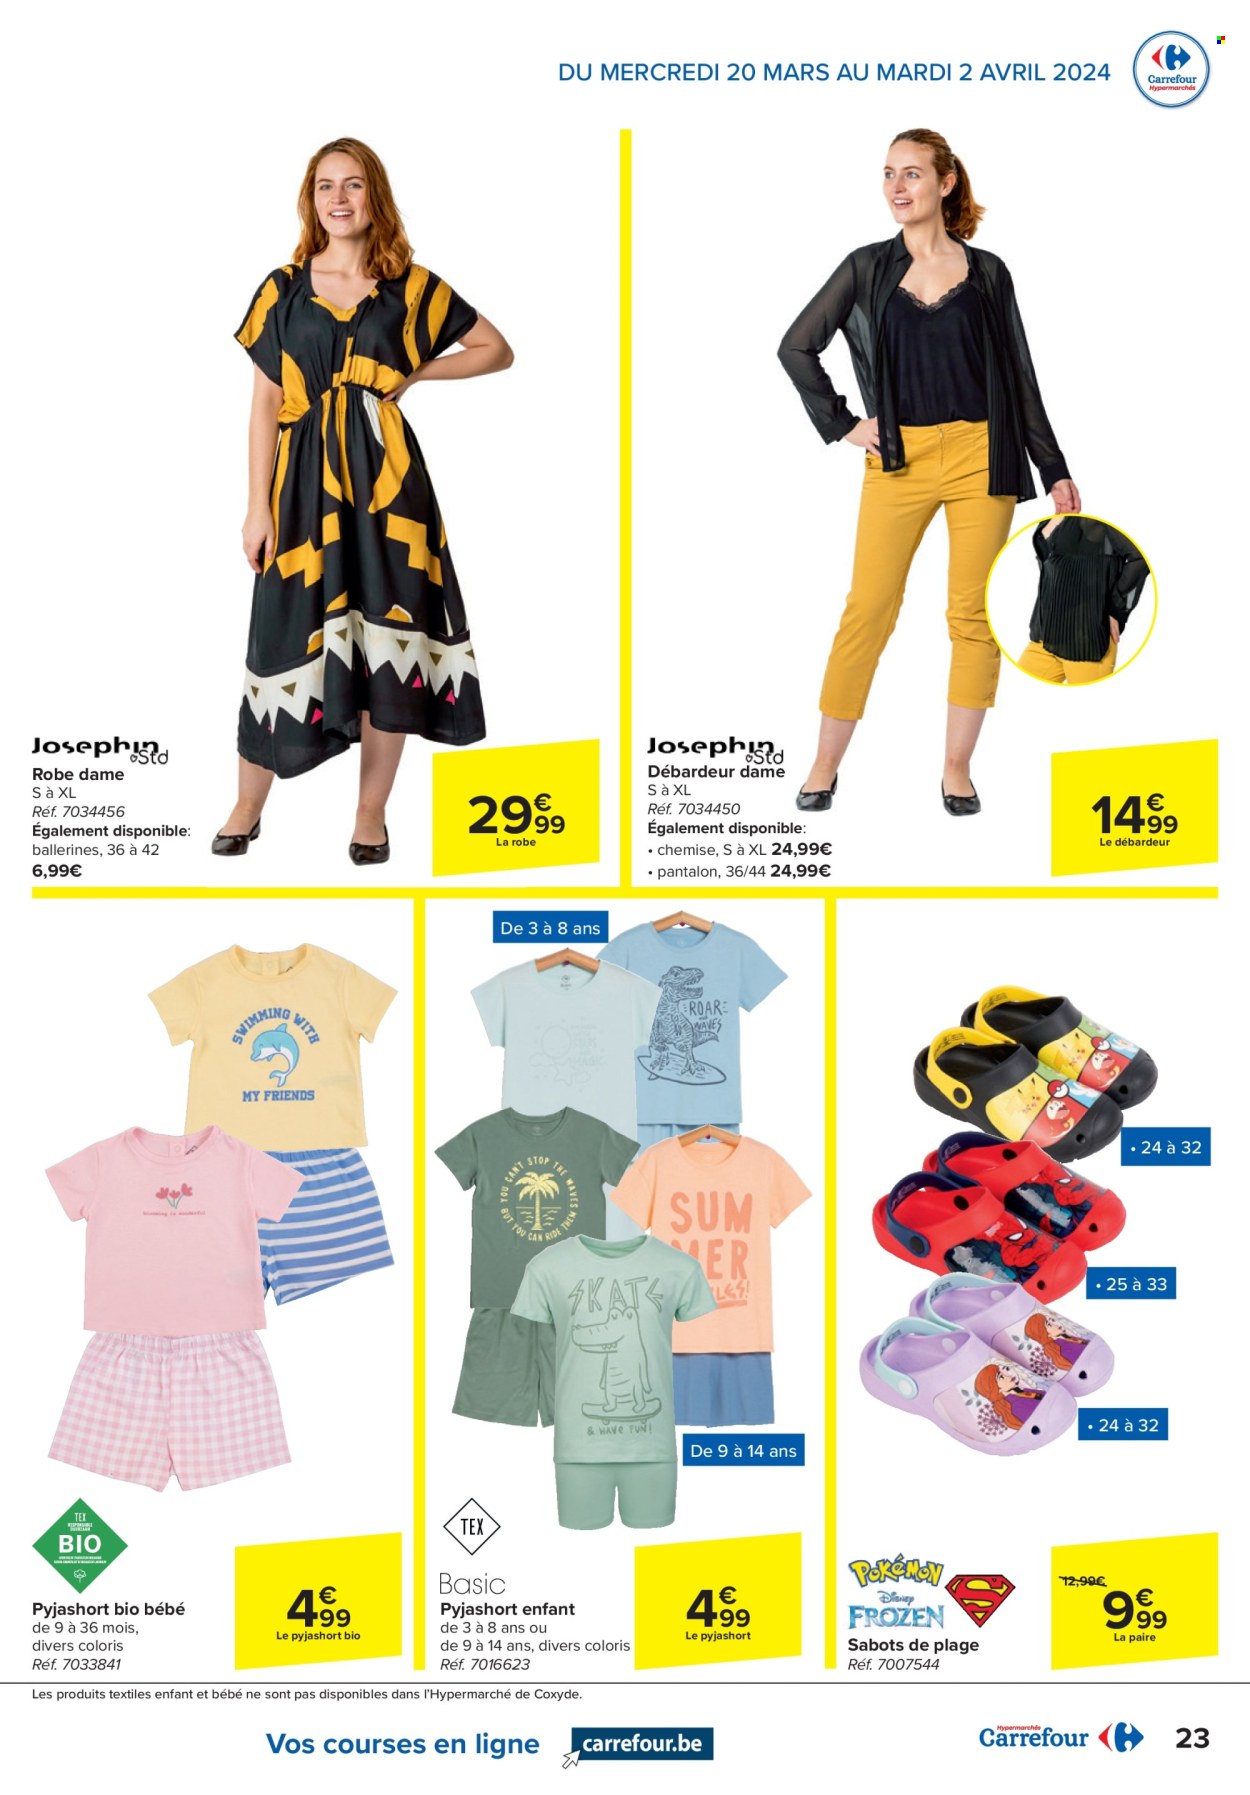 Catalogue Carrefour hypermarkt - 20.3.2024 - 2.4.2024. Page 23.